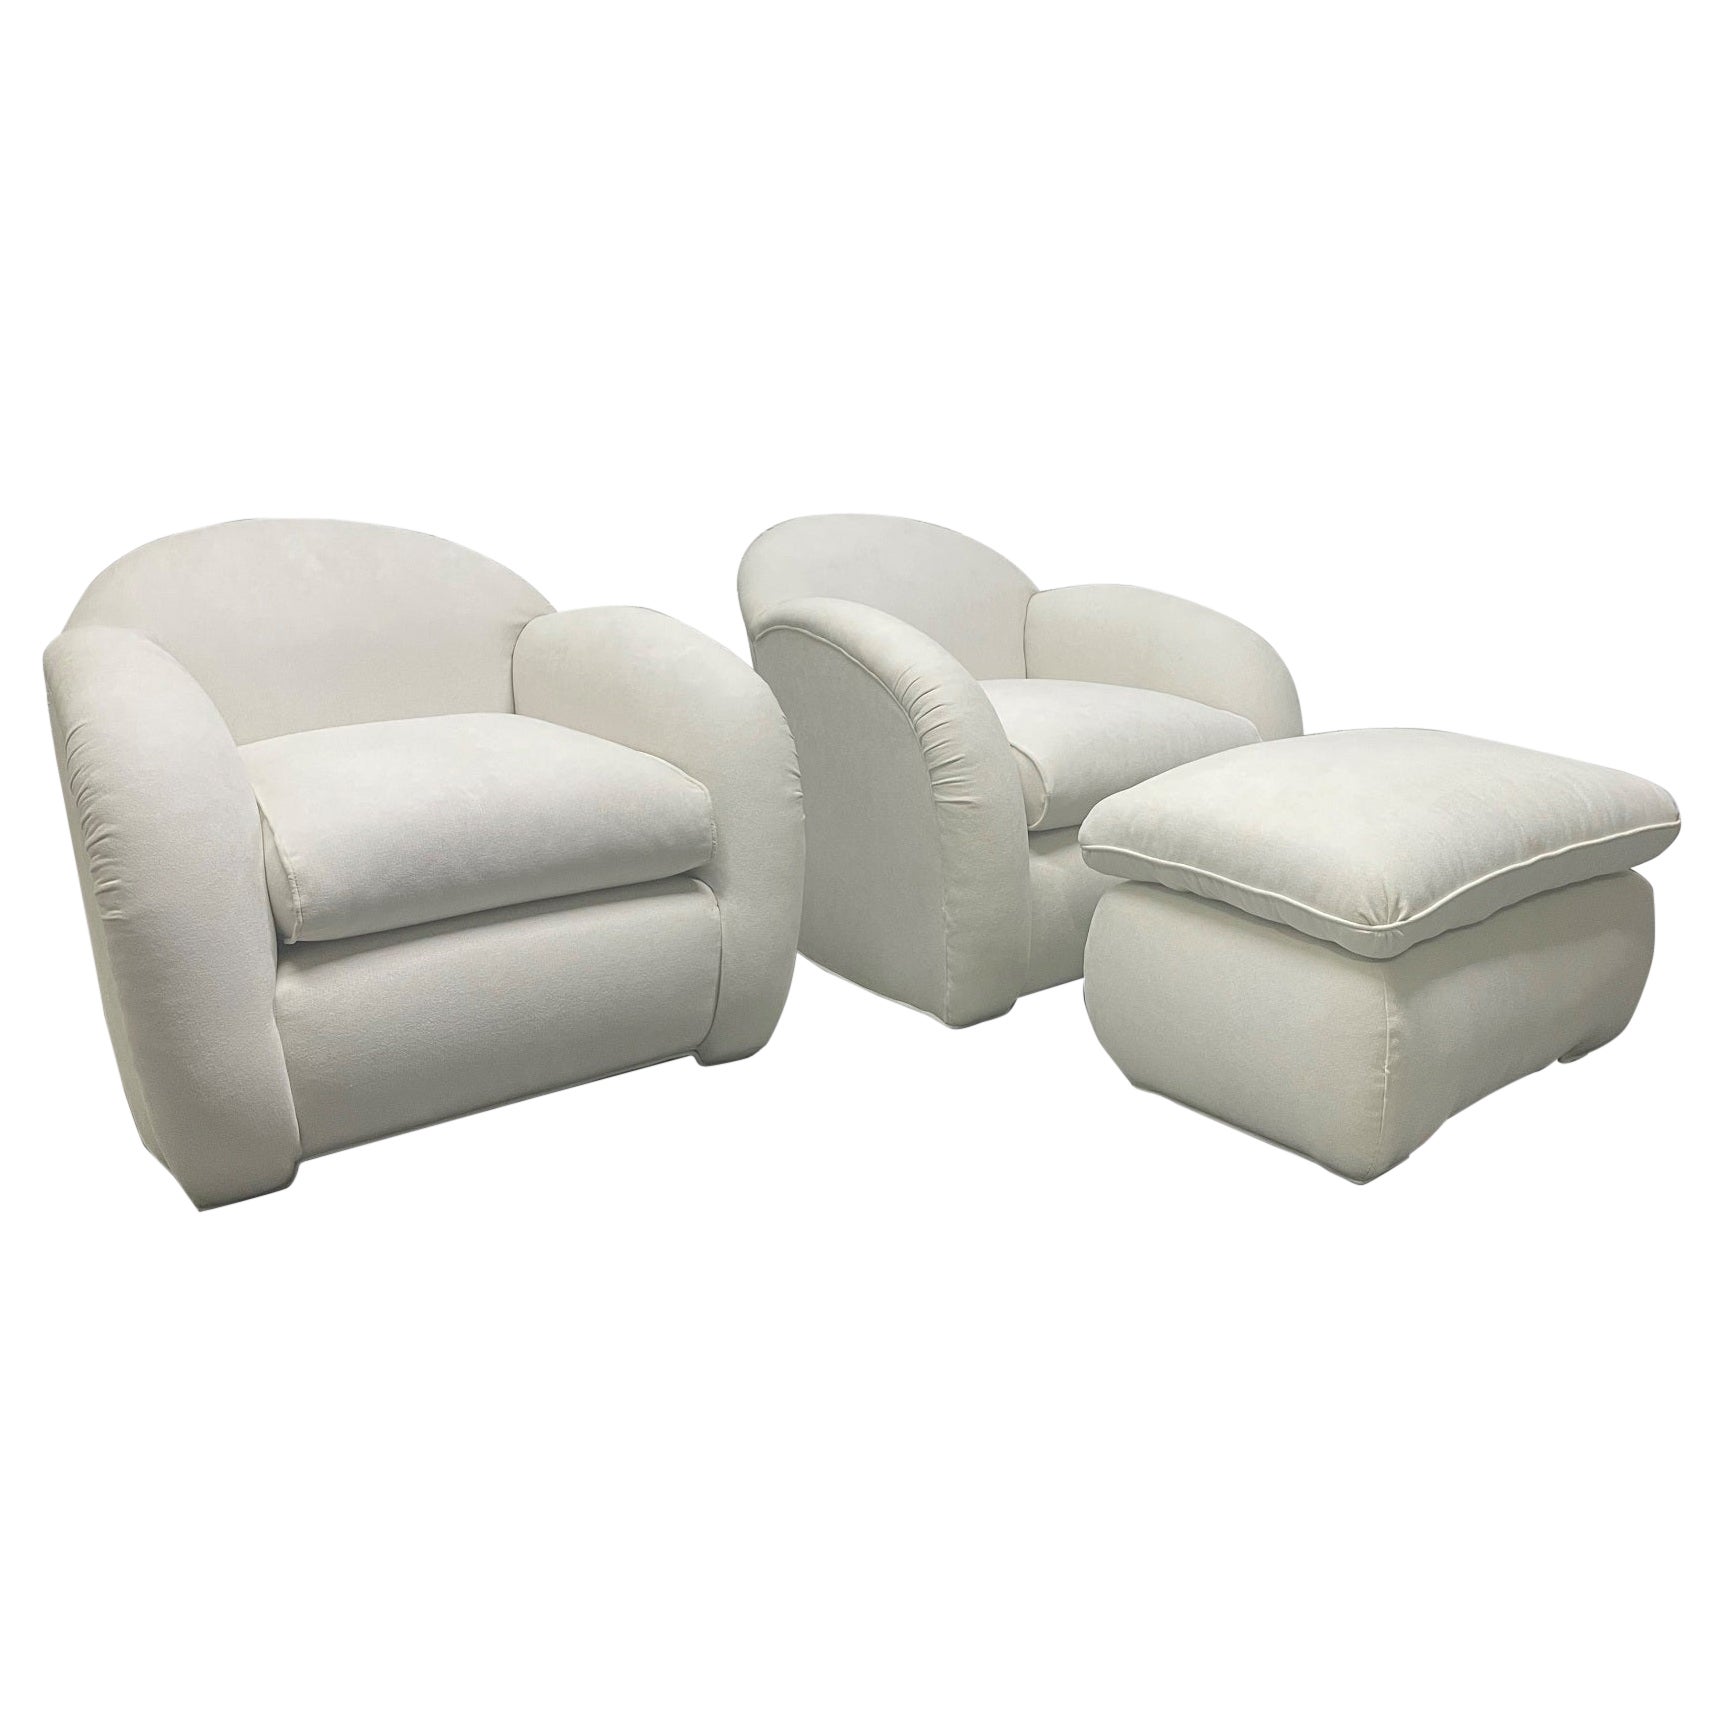 Pair Art Deco Lounge Chairs with Matching Ottoman